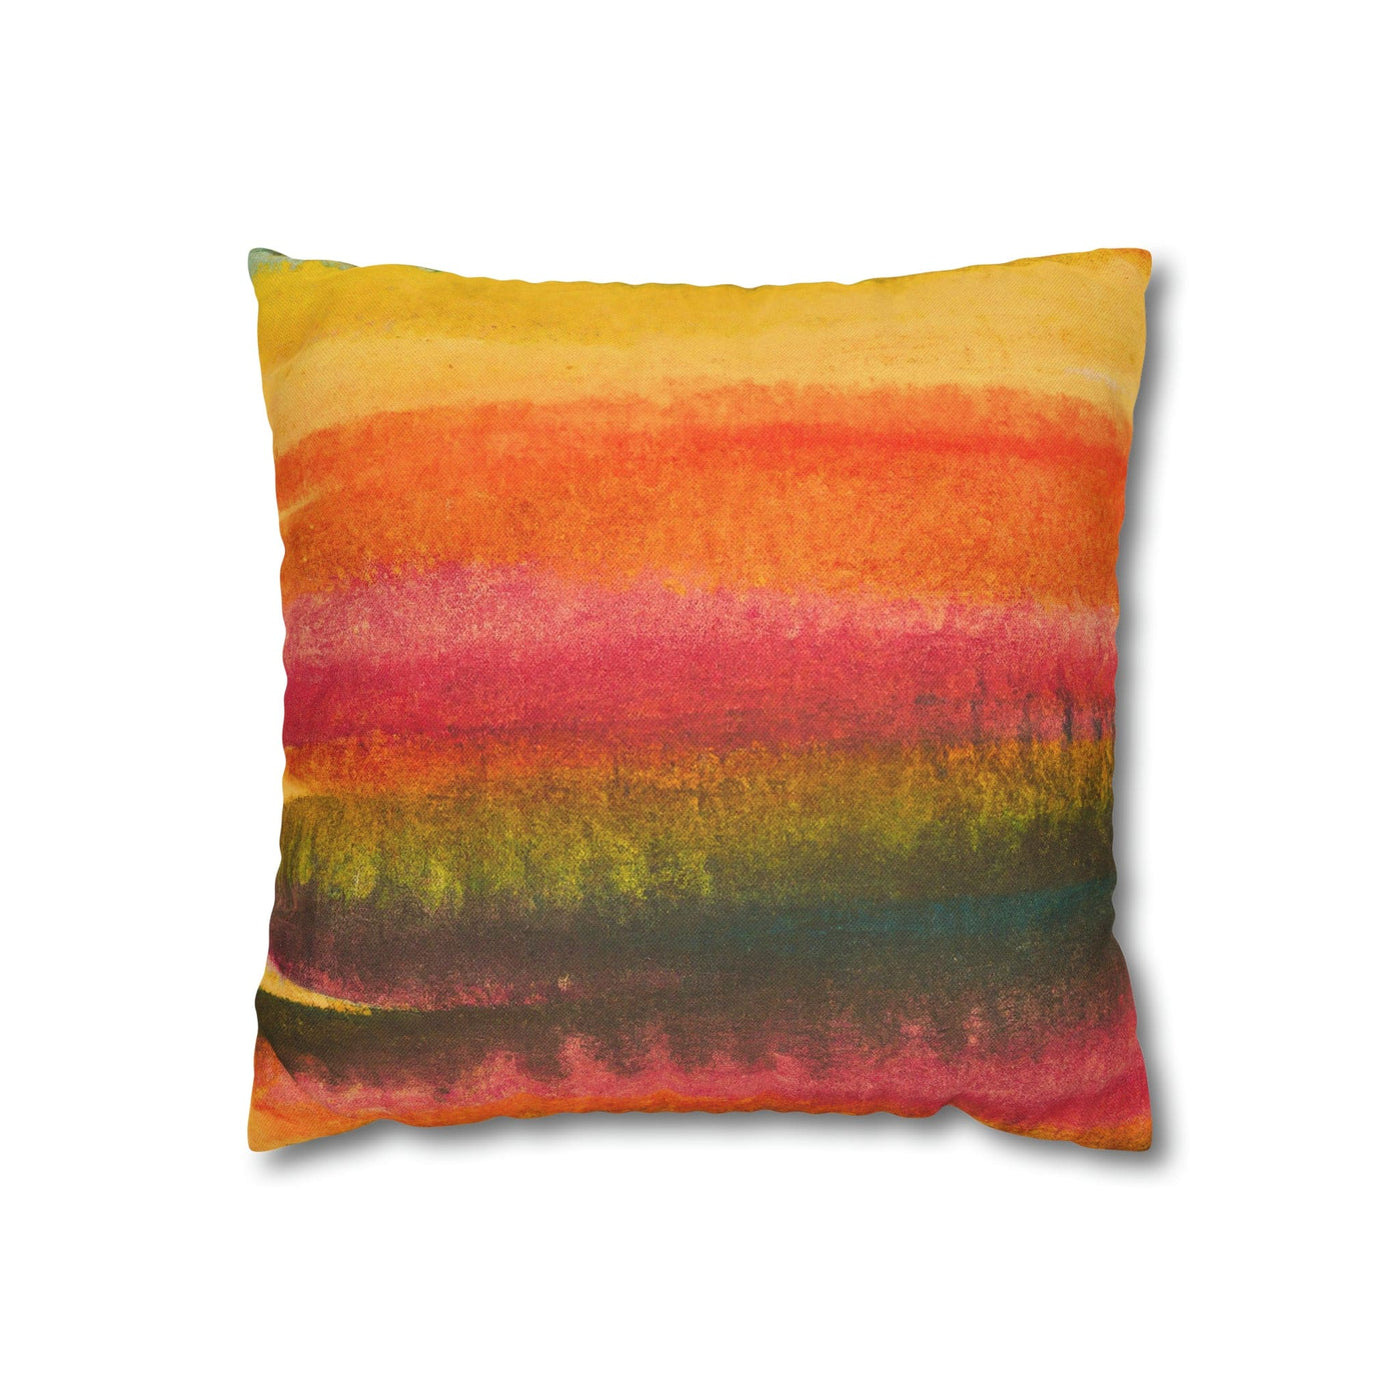 Decorative Throw Pillow Covers With Zipper - Set Of 2 Autumn Fall Watercolor